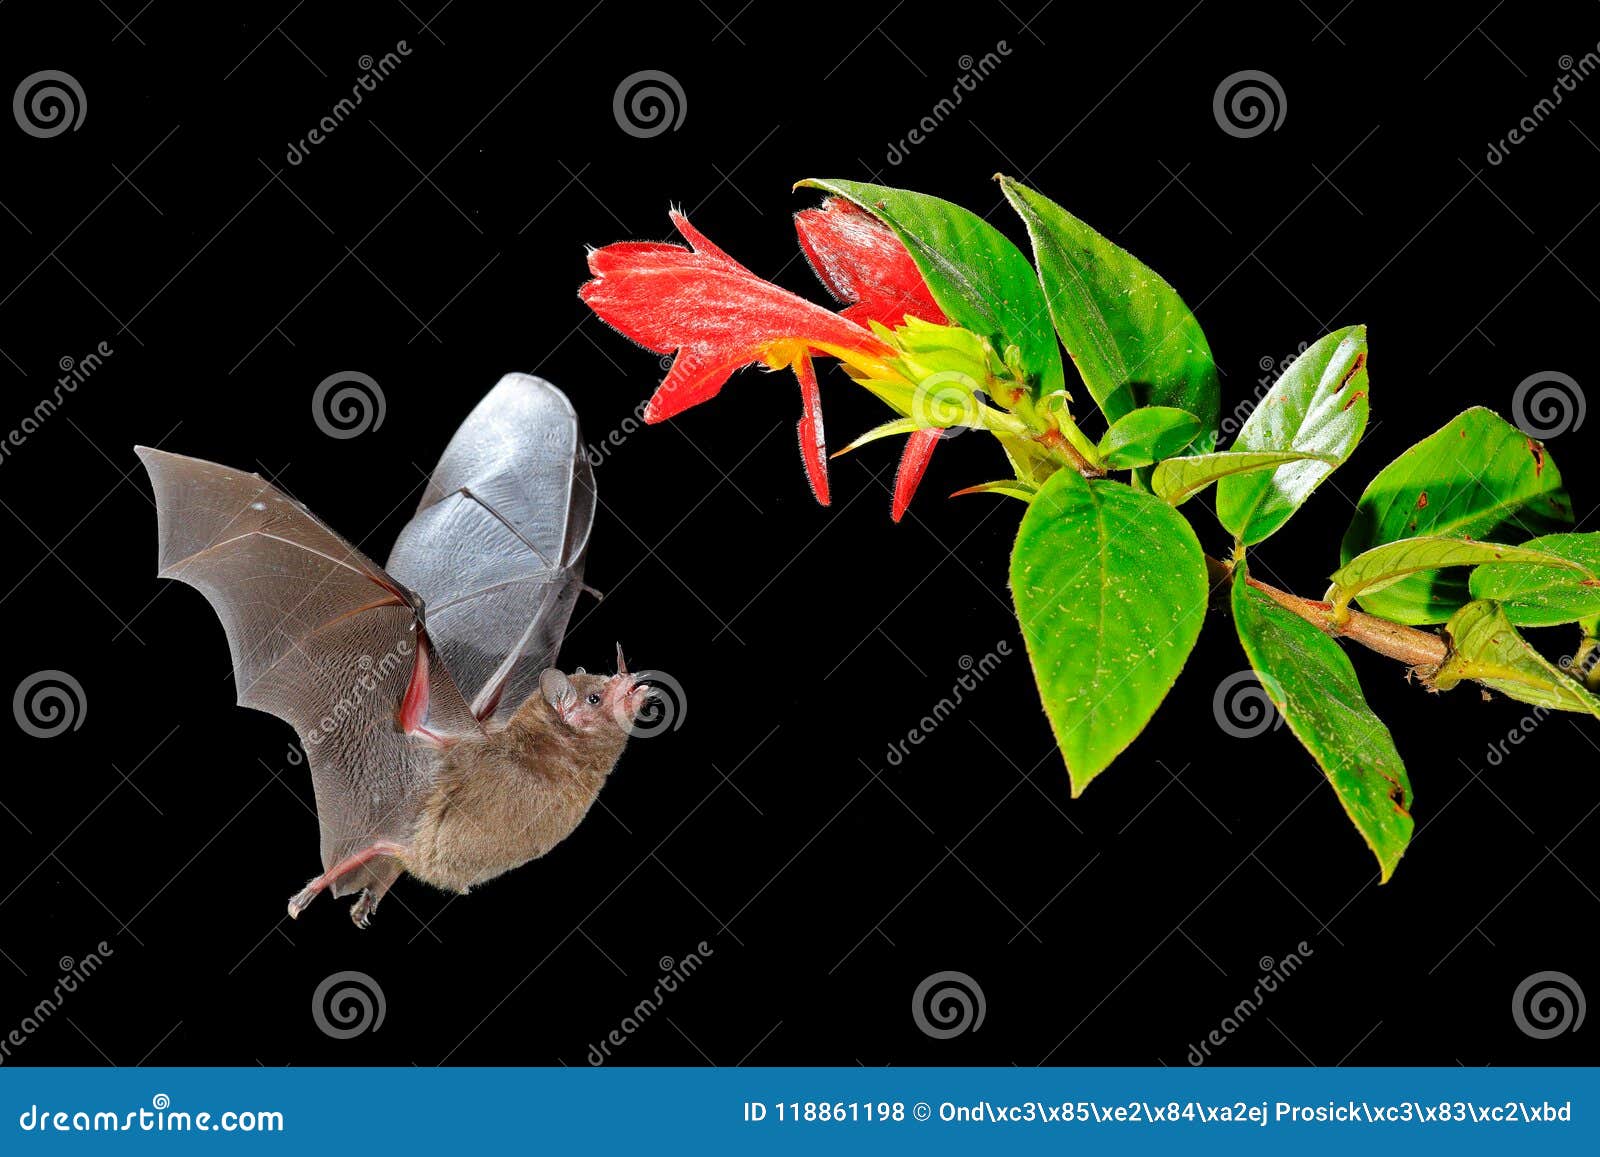 night nature, pallas`s long-tongued bat, glossophaga soricina, flying bat in dark night. nocturnal animal in flight with red feed